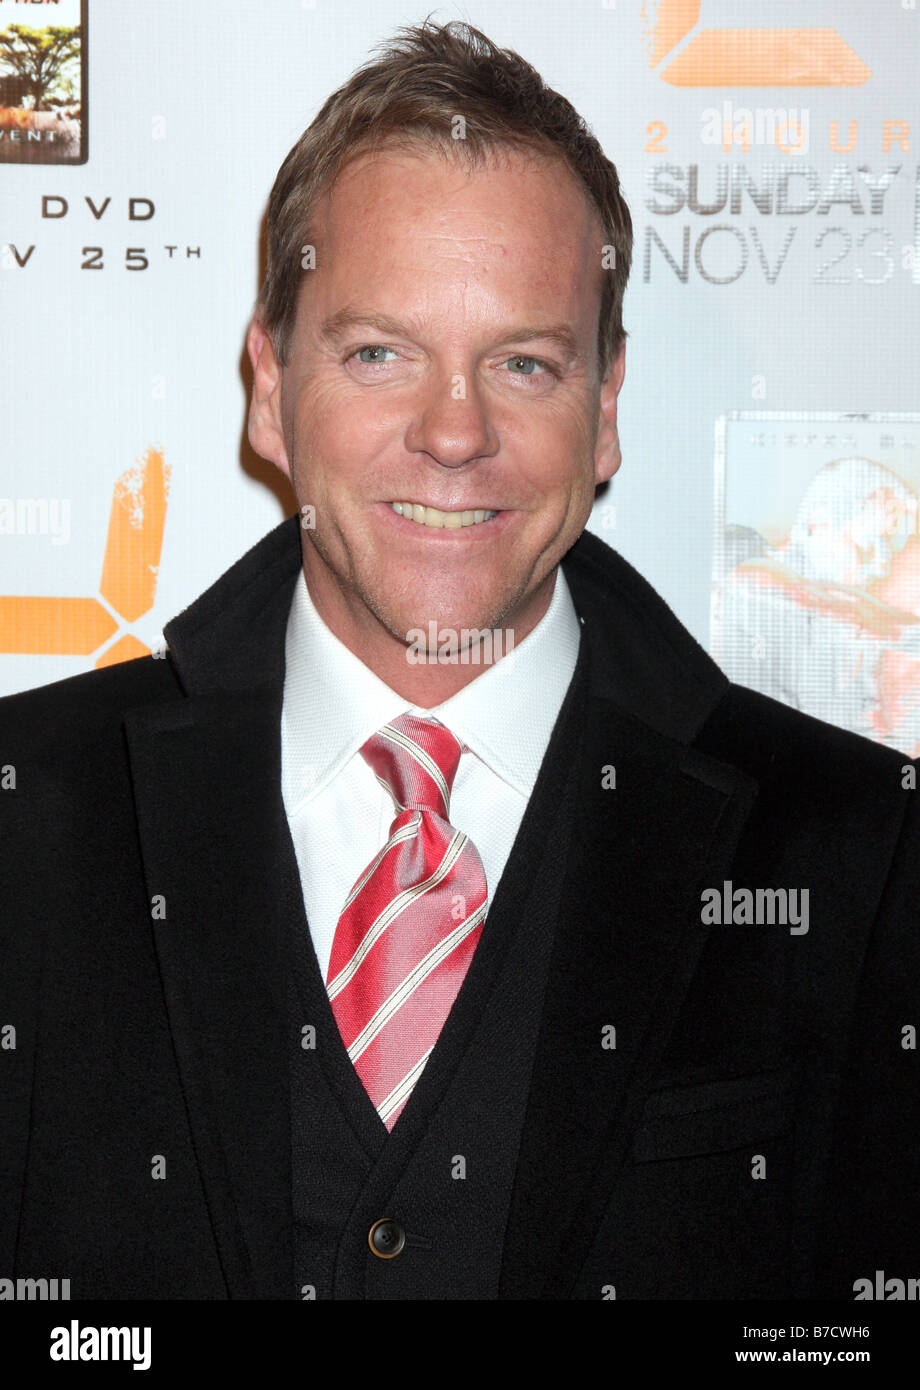 Kiefer Sutherland at the '24: Redemption' premiere in New York City. Stock Photo